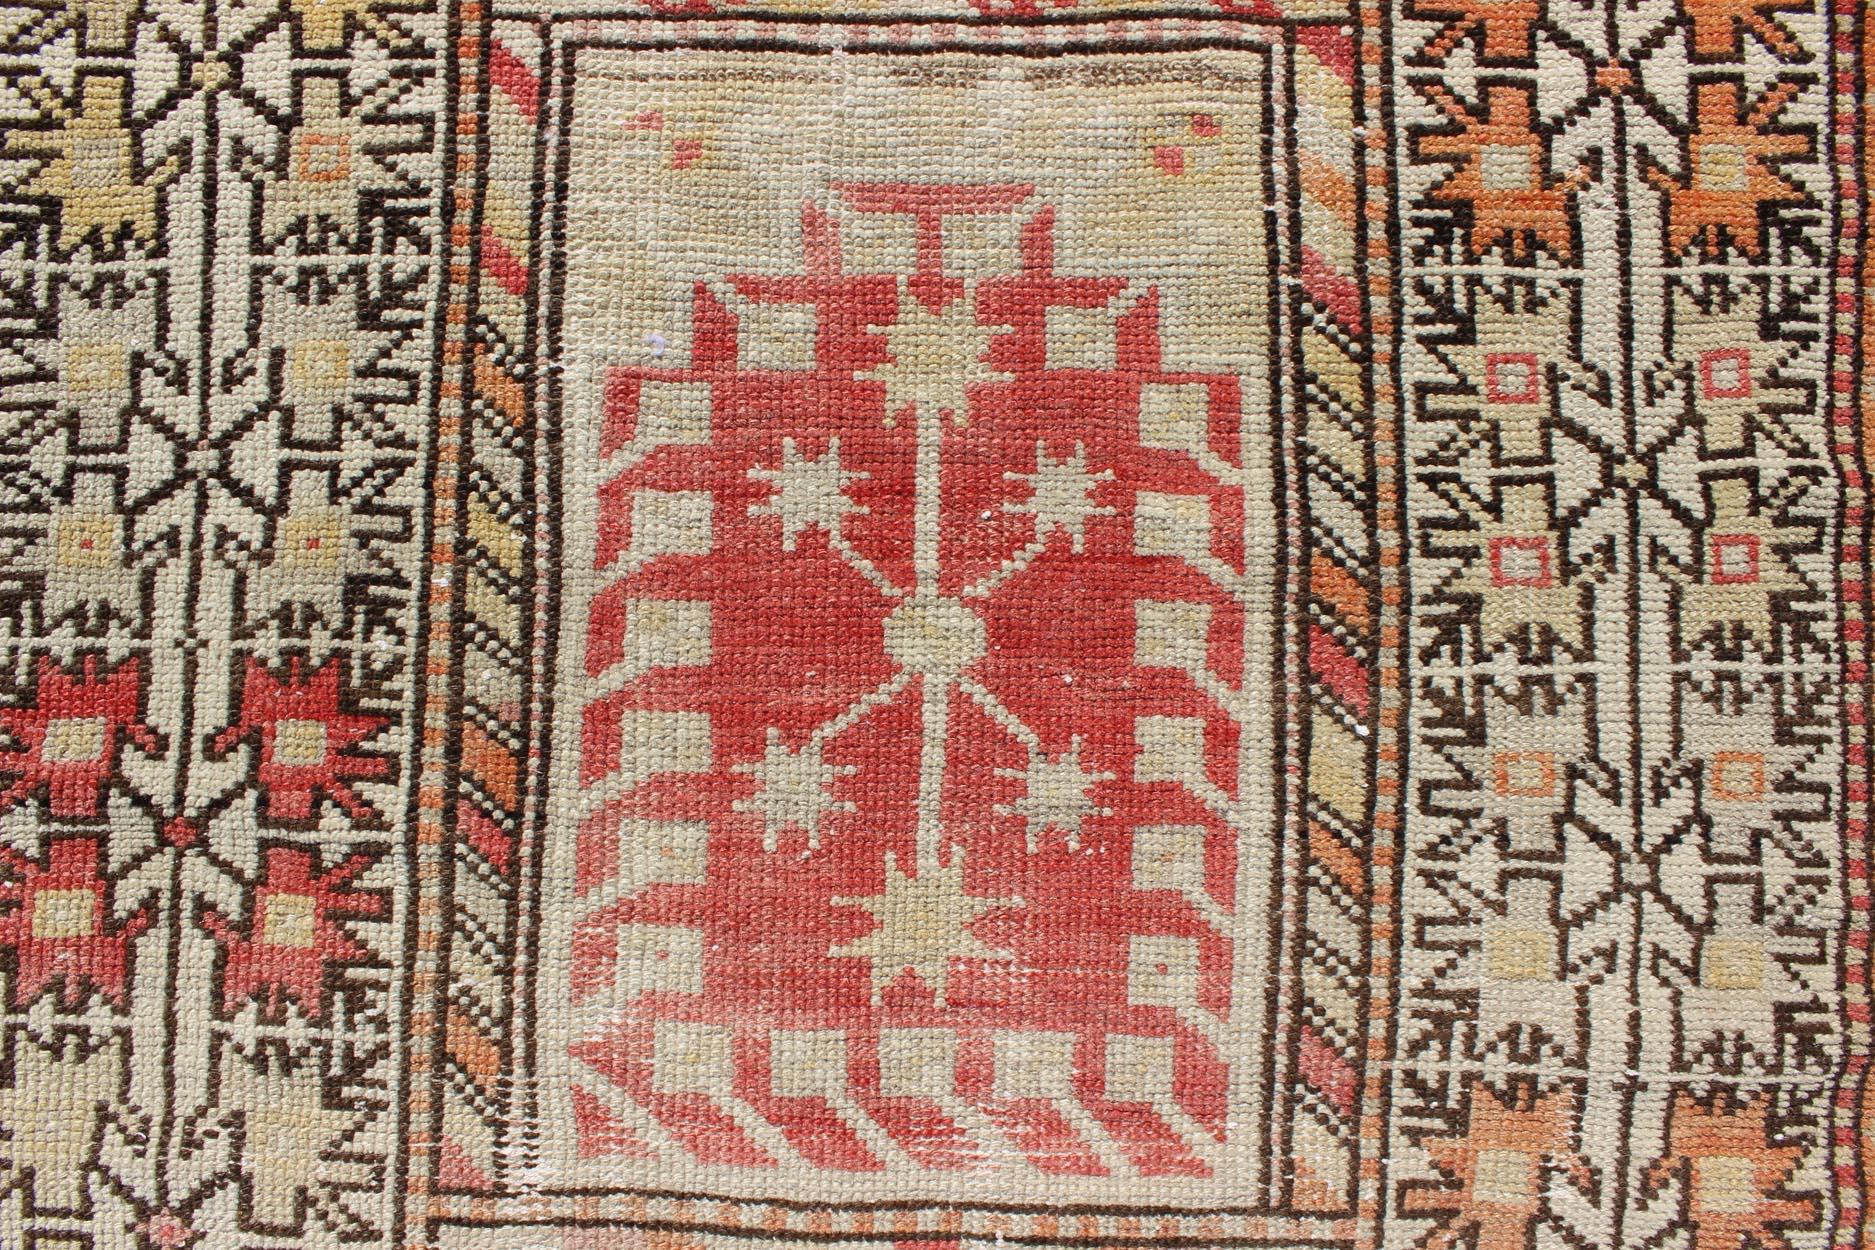 Wool Tribal-Geometric Design Antique Turkish Oushak Rug in Burnt Orange and Brown For Sale